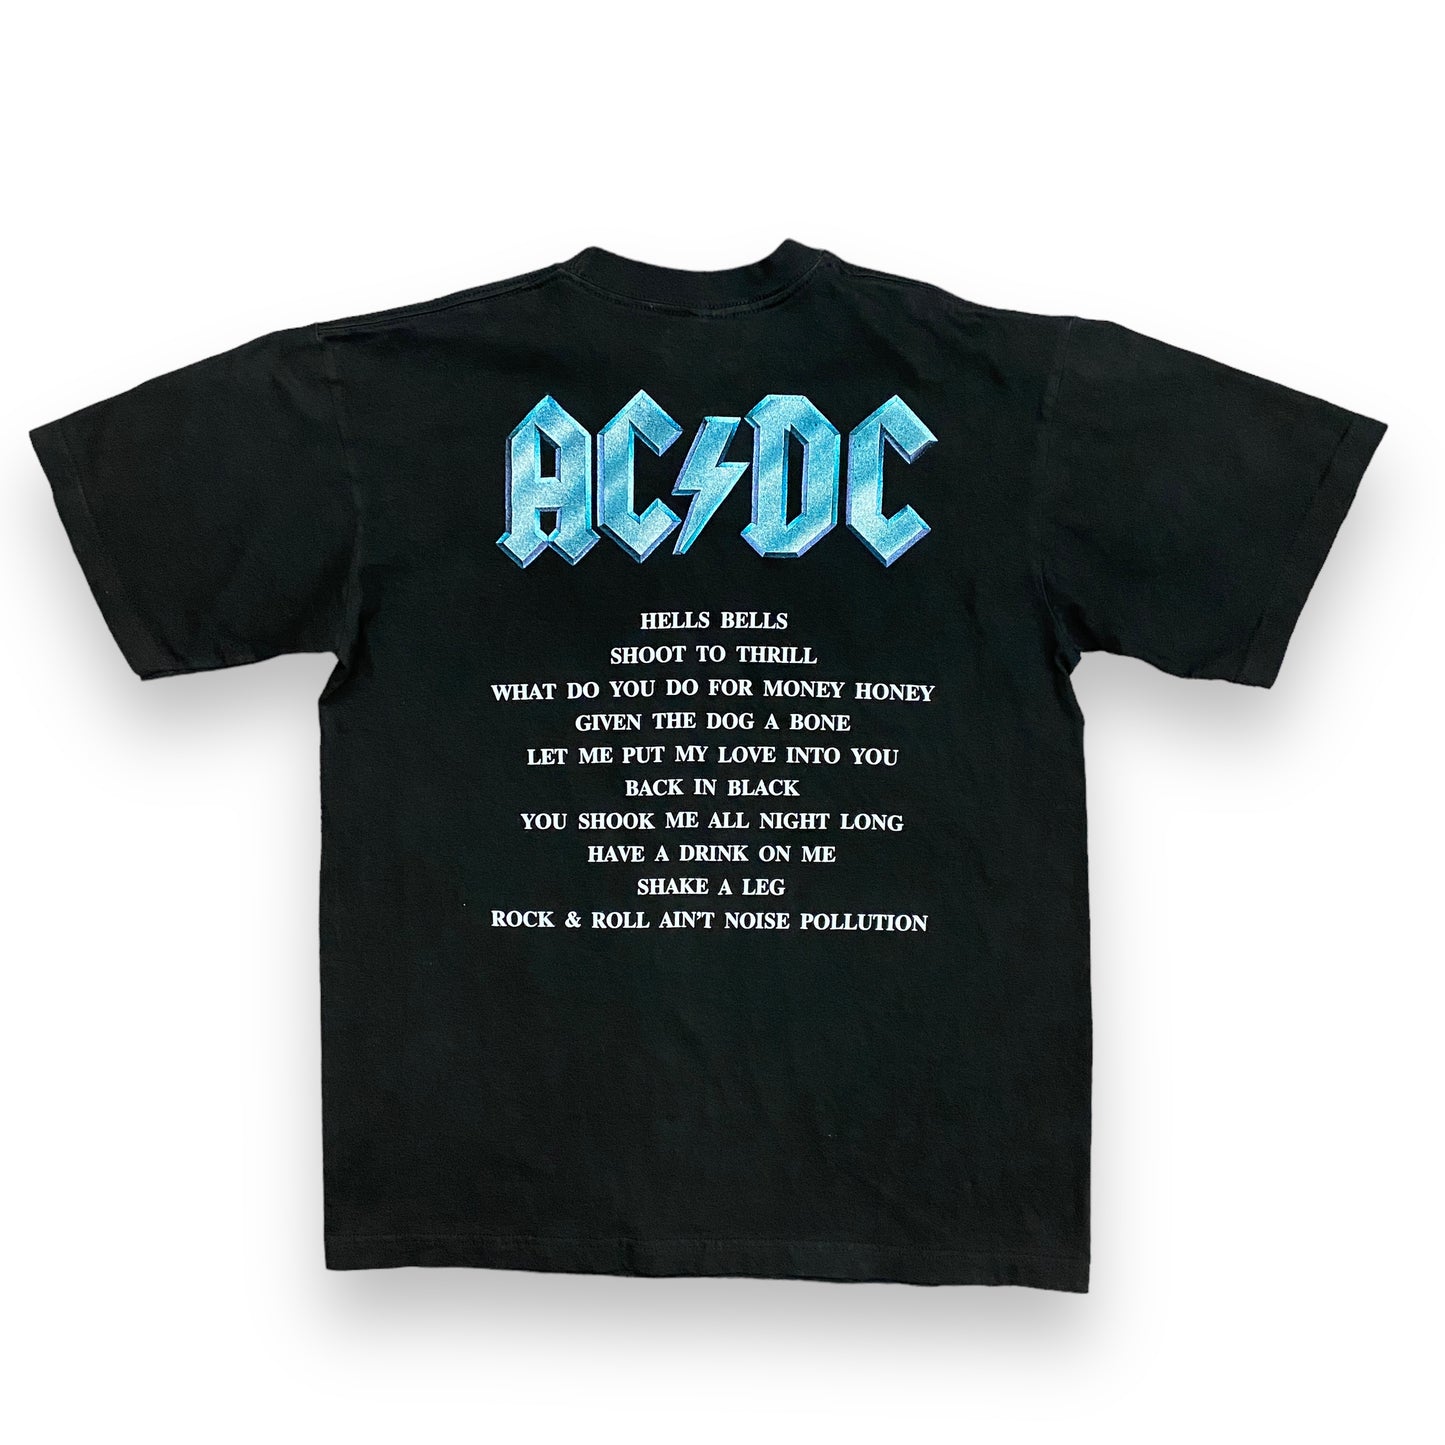 Vintage 1996 AC/DC "Back in Black" Band Tee - Size Large